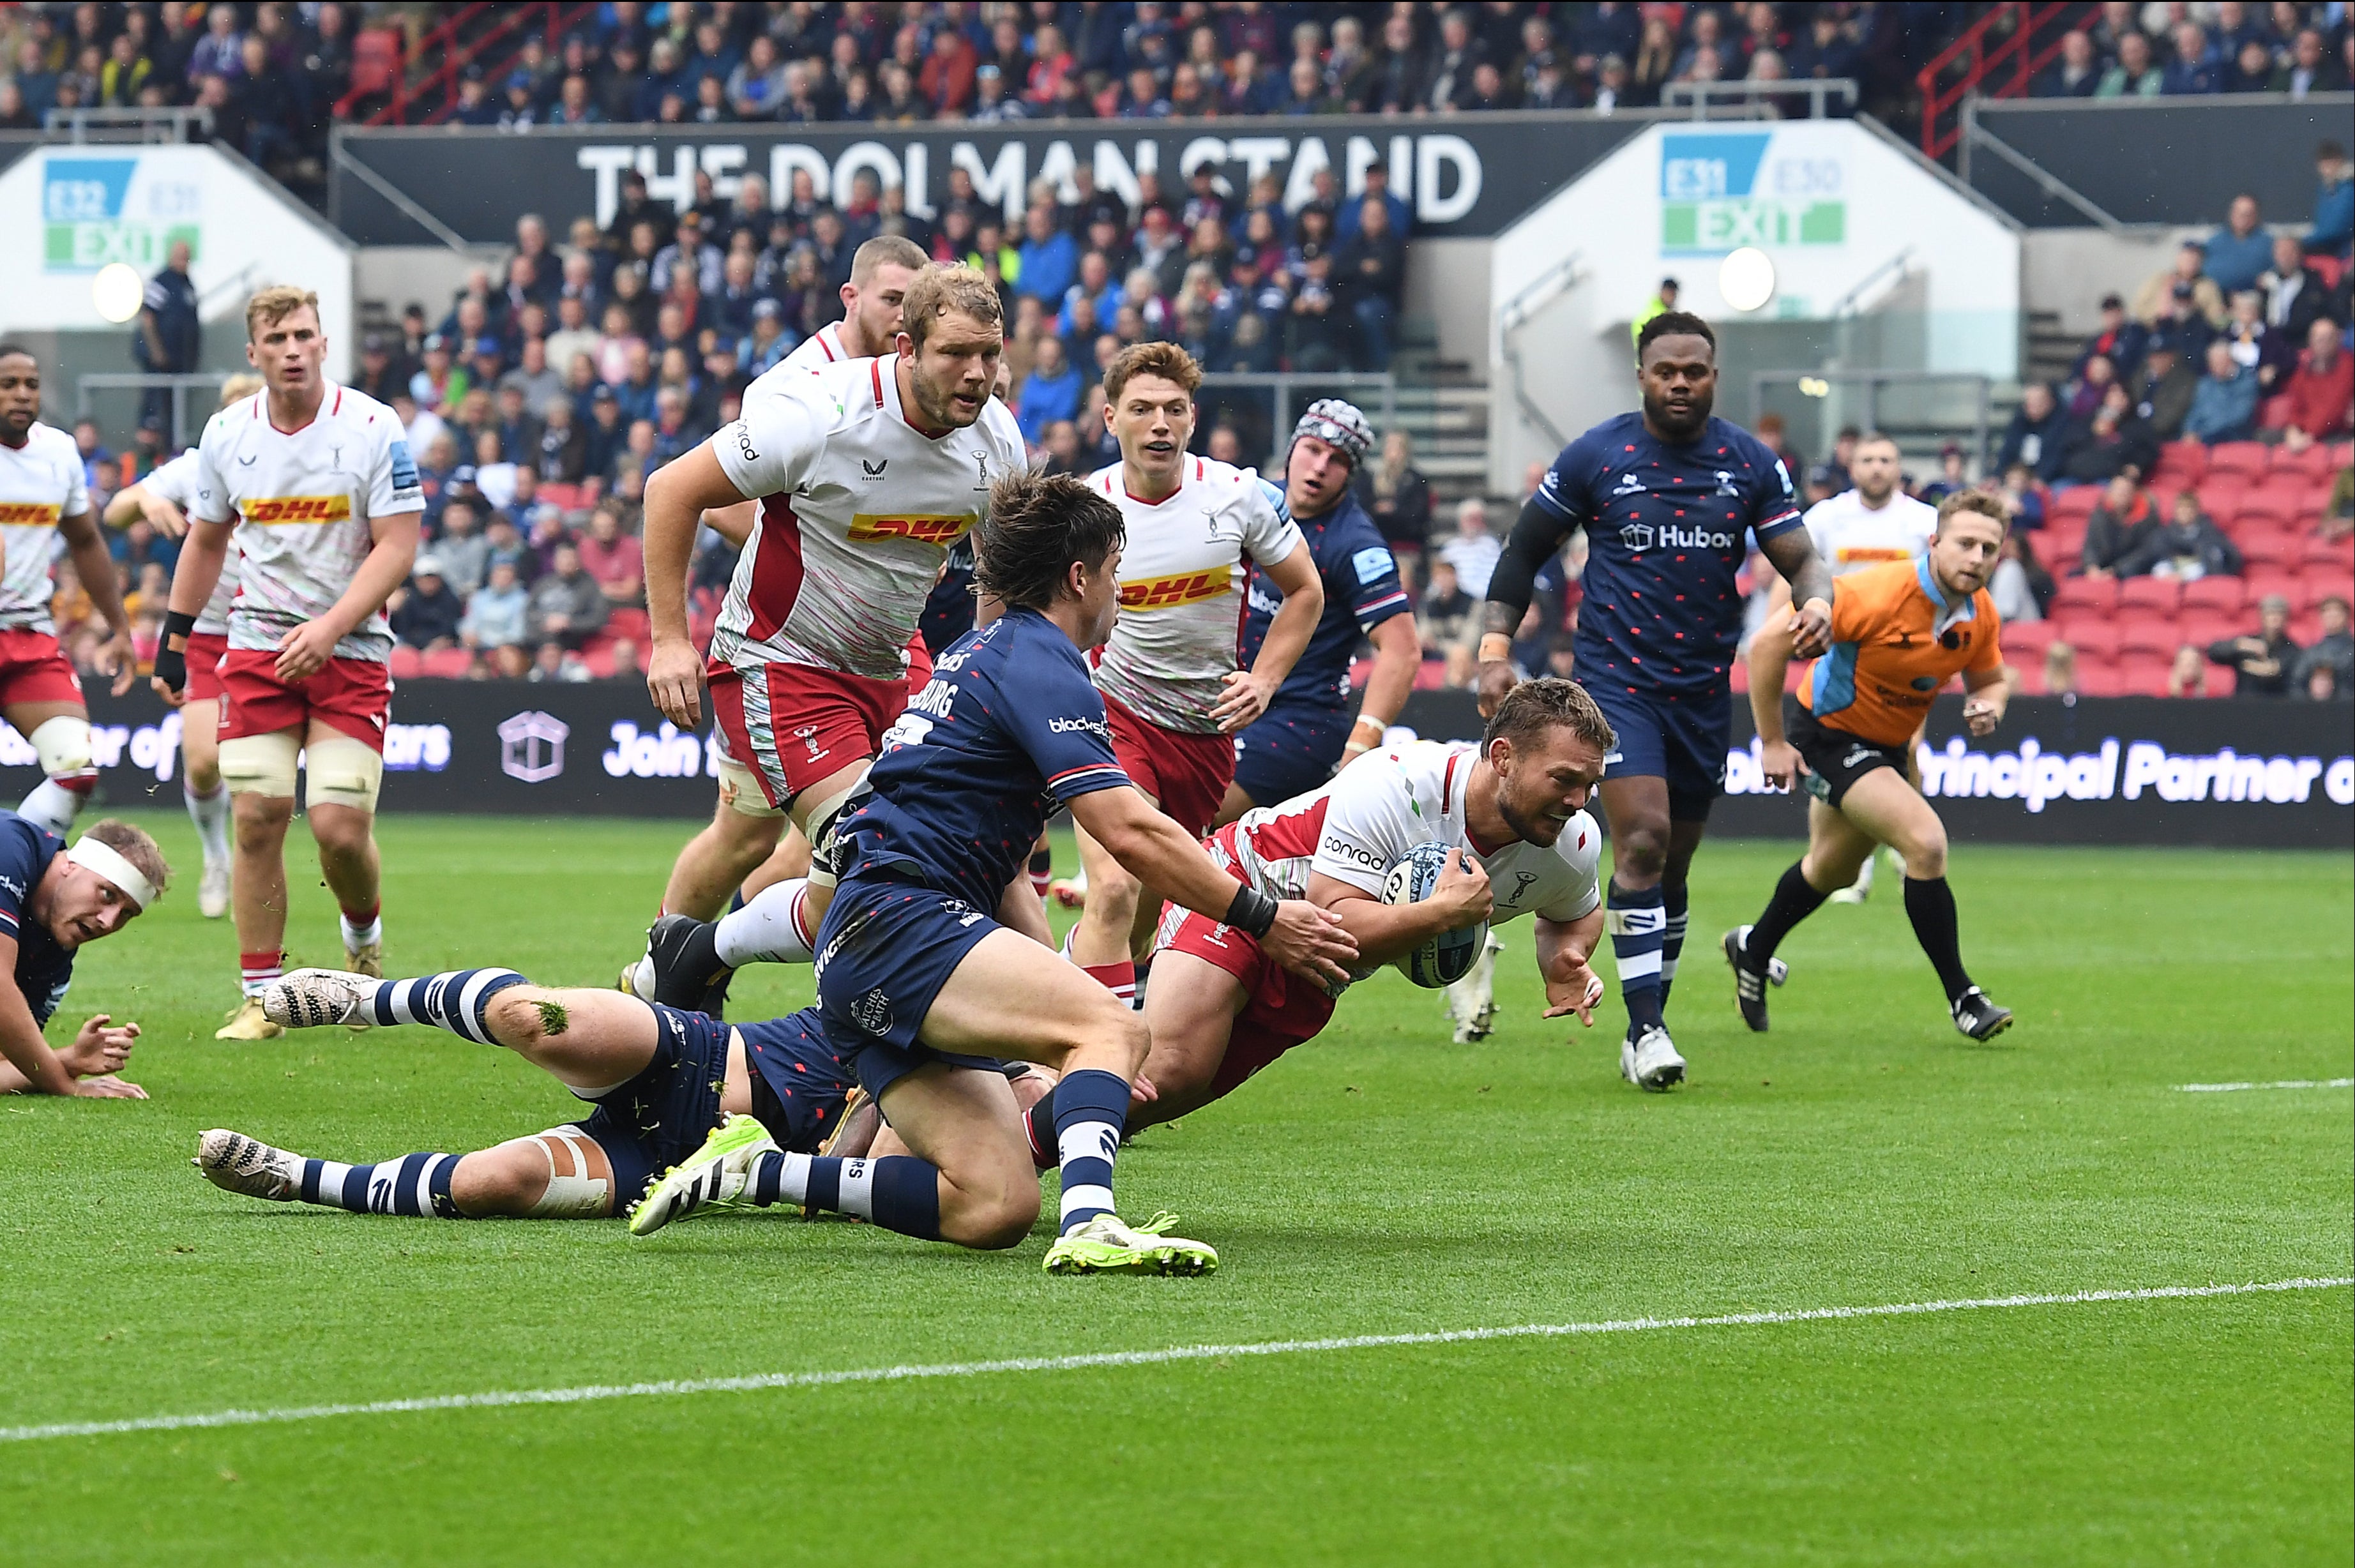 Harlequins and Bristol should provide an entertaining finale at the Twickenham Stoop